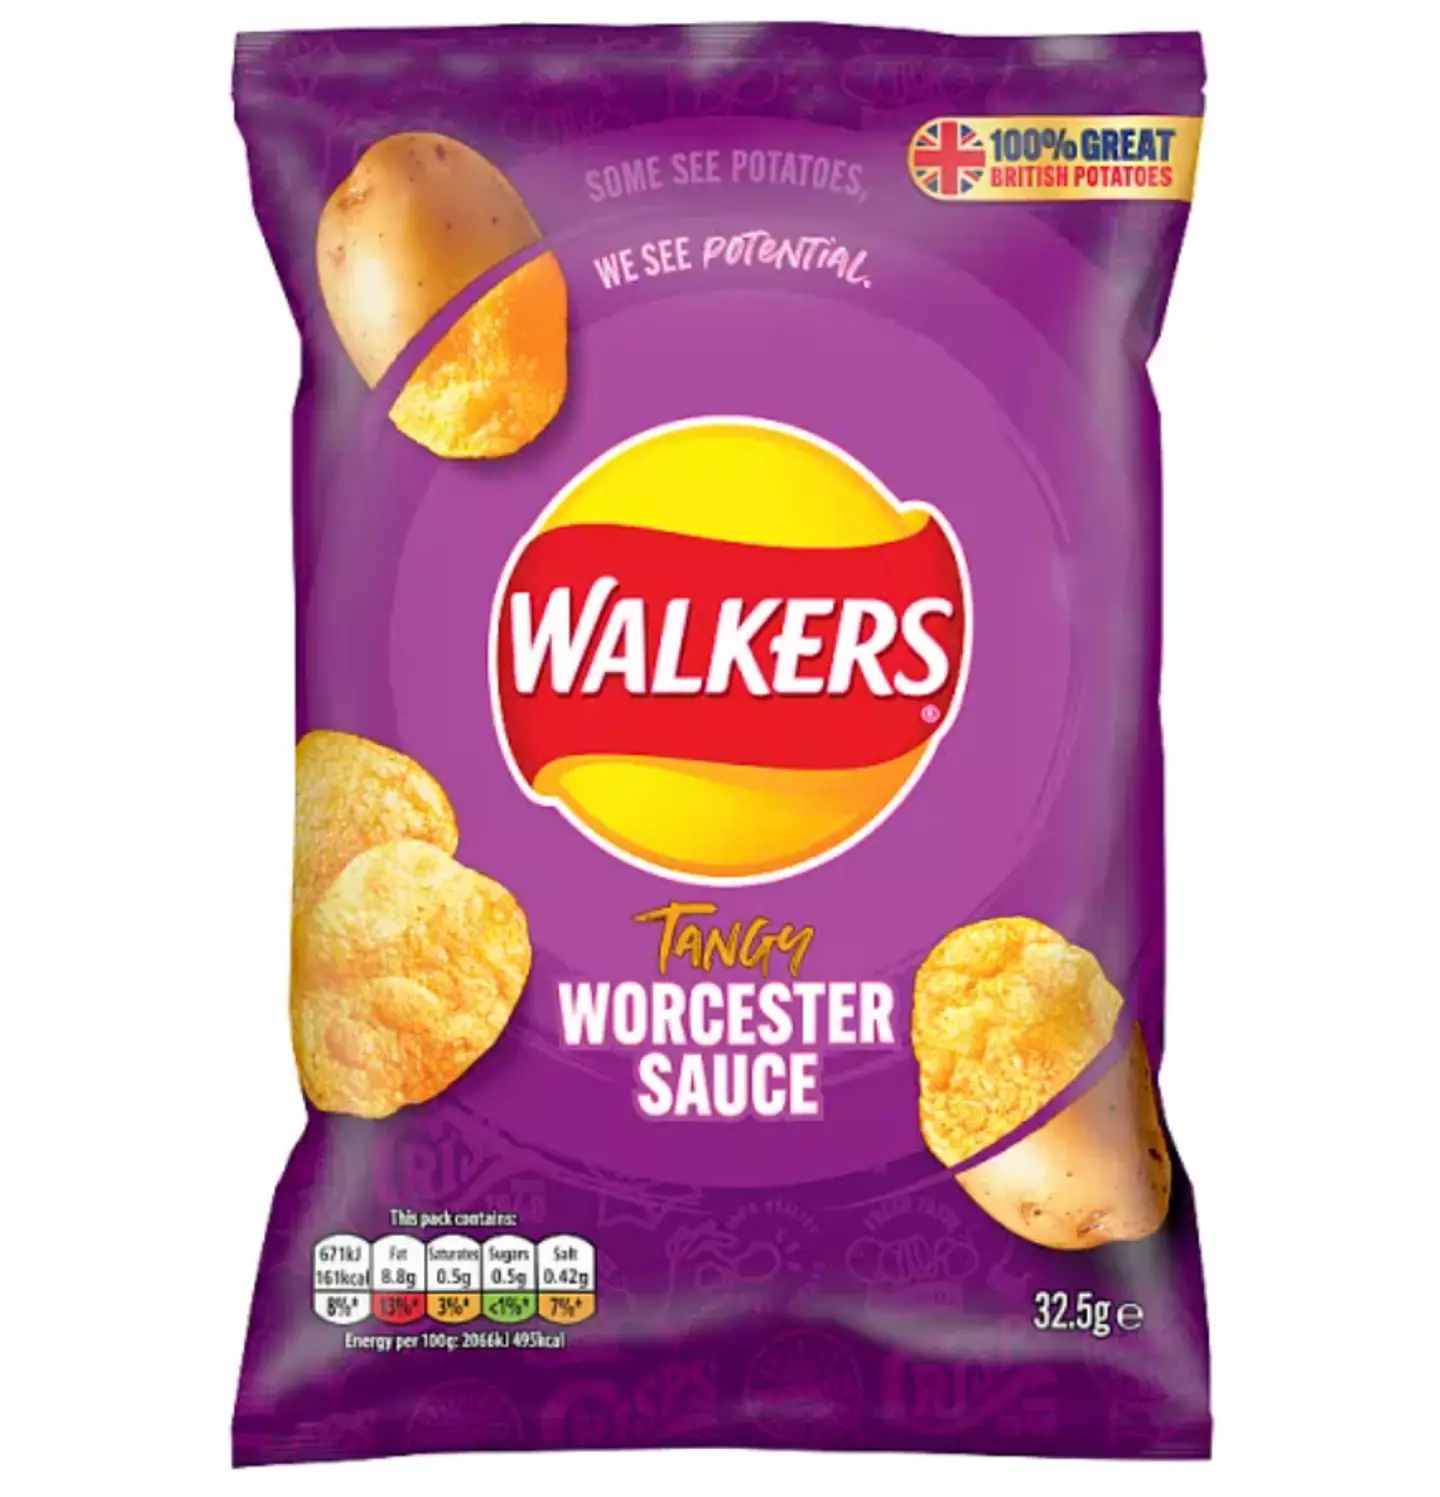 It seems Walkers worcester sauce flavour is also thing of the past.